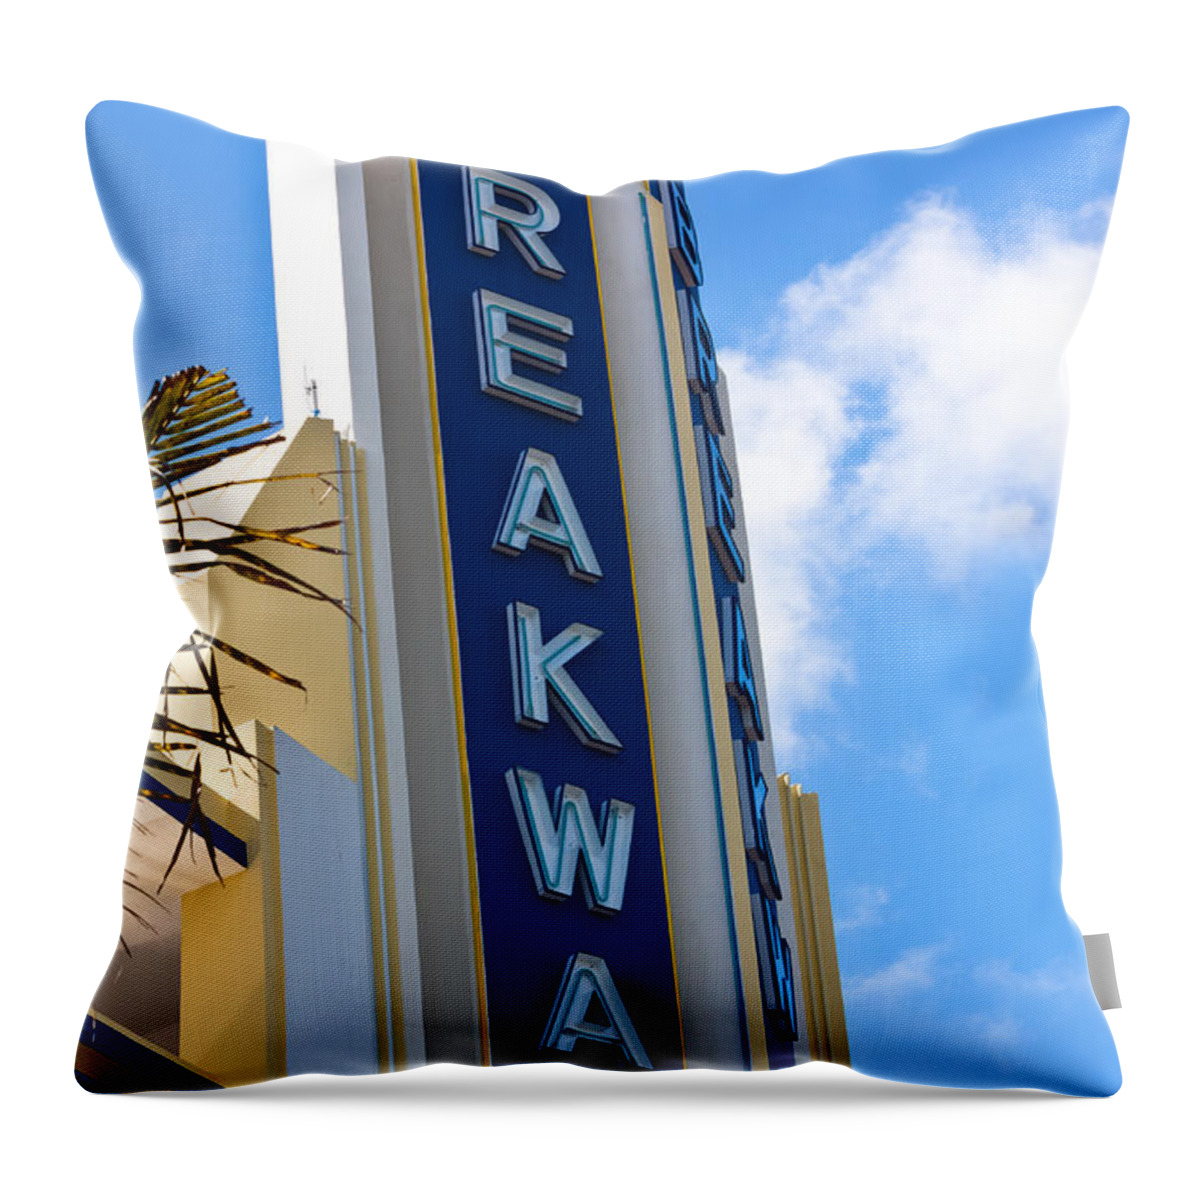 Breakwater Hotel Throw Pillow featuring the photograph The Breakwater Neon Sign by Ed Gleichman